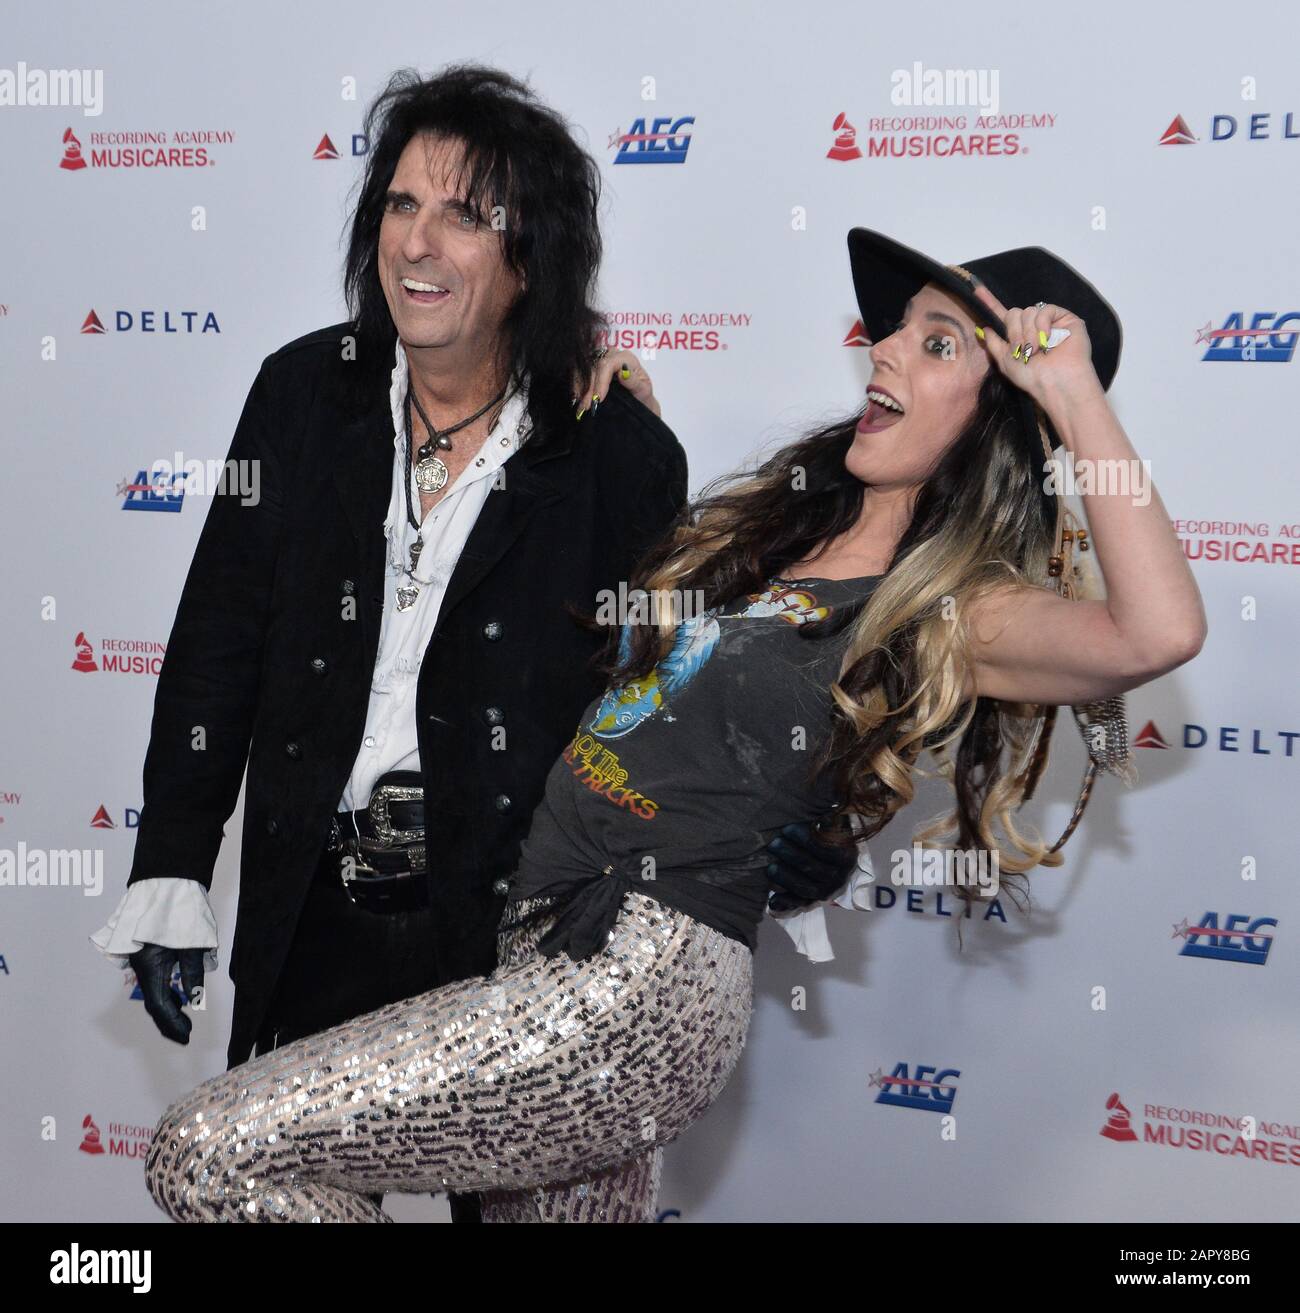 Los Angeles, USA. 25th Jan, 2020. Alice Cooper and his daughter Calico Cooper arrive for the MusiCares Person of the Year gala honoring Aerosmith at the Los Angeles Convention Center in Los Angeles on Friday, January 24, 2020. Photo by Jim Ruymen/UPI Credit: UPI/Alamy Live News Stock Photo